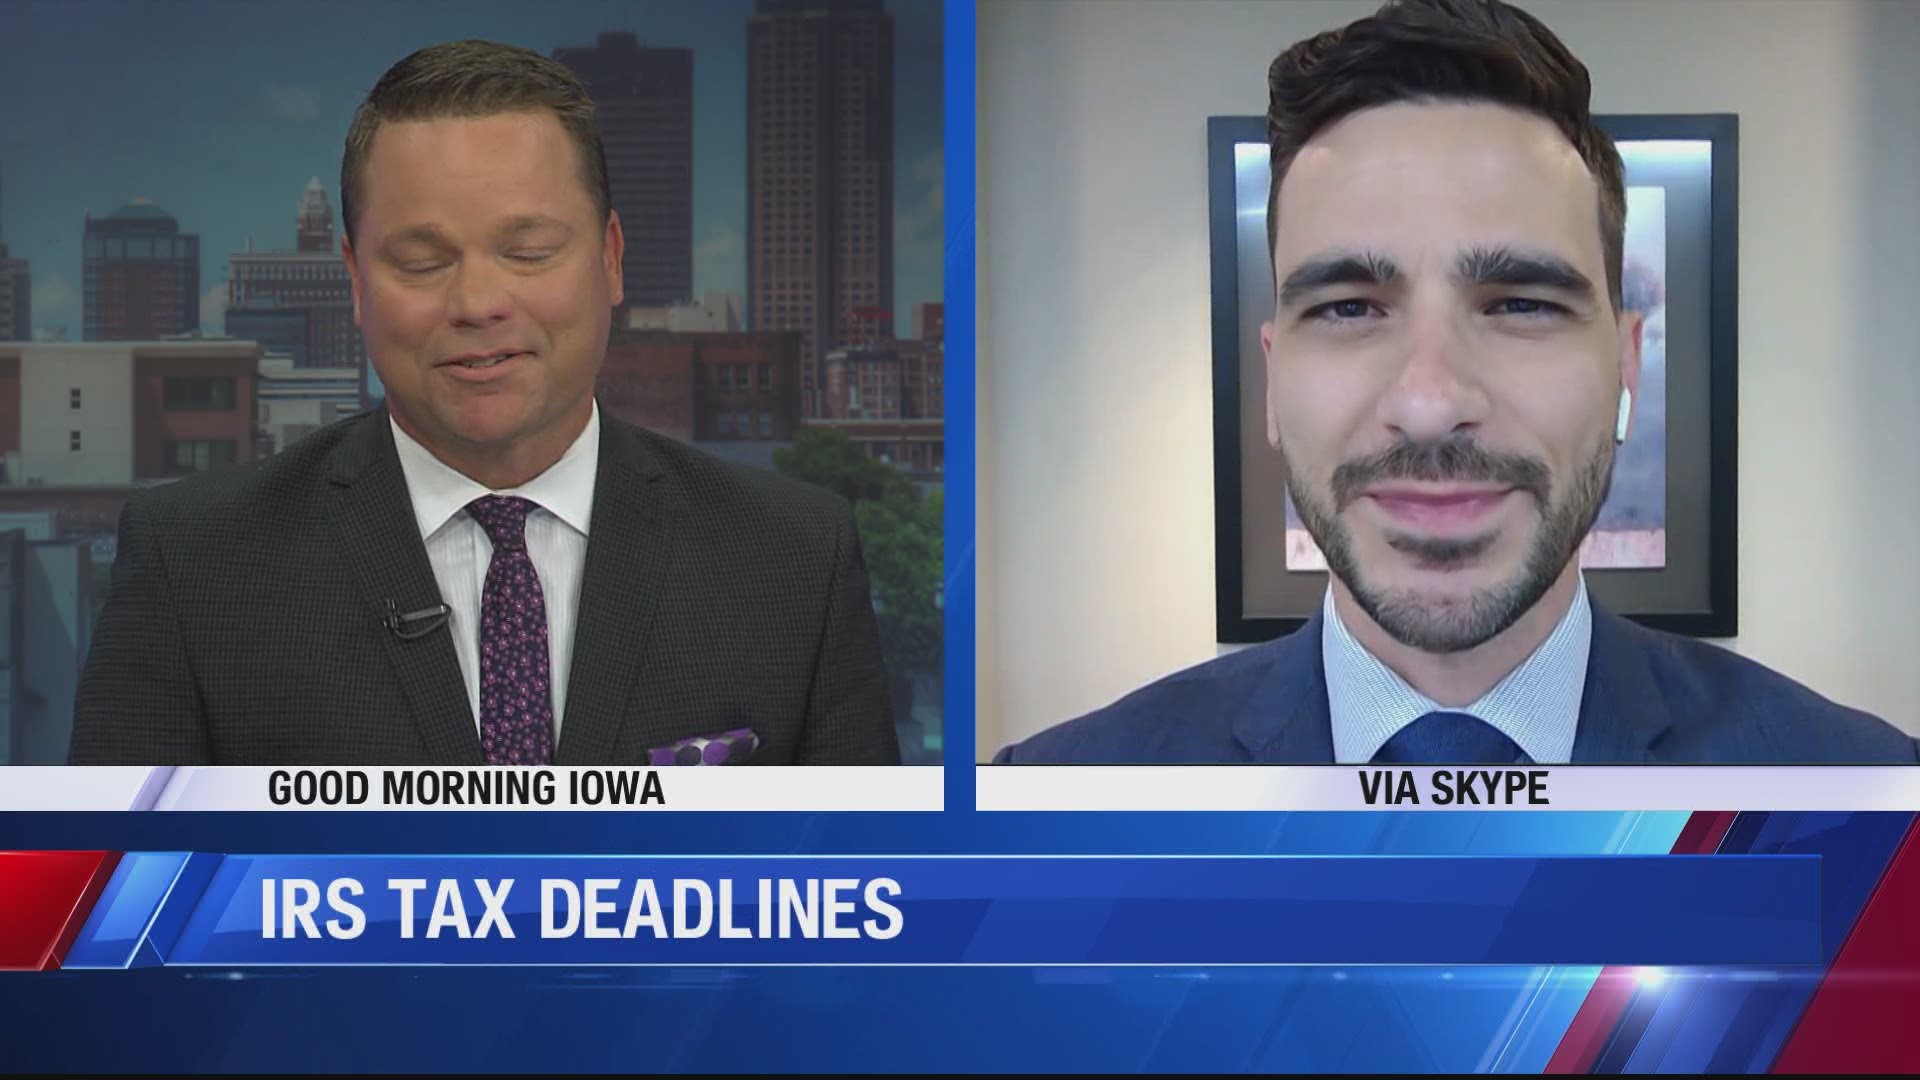 Financial professional Cameron McCarty joins us to share more information on IRS tax deadlines.